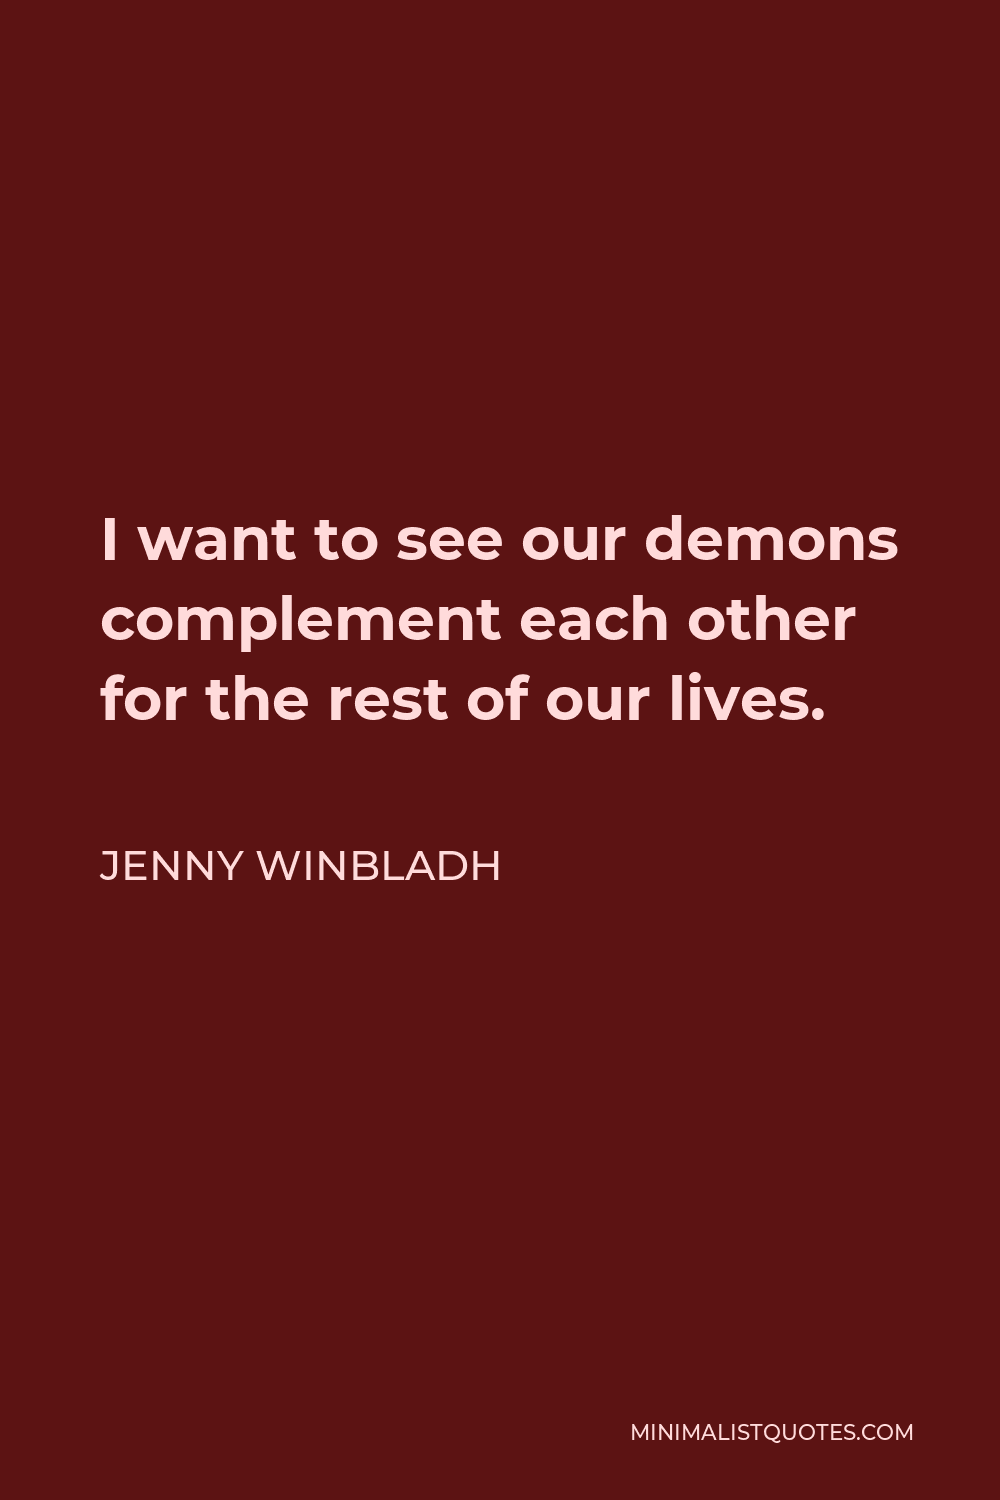 Jenny Winbladh Quote - I want to see our demons complement each other for the rest of our lives.